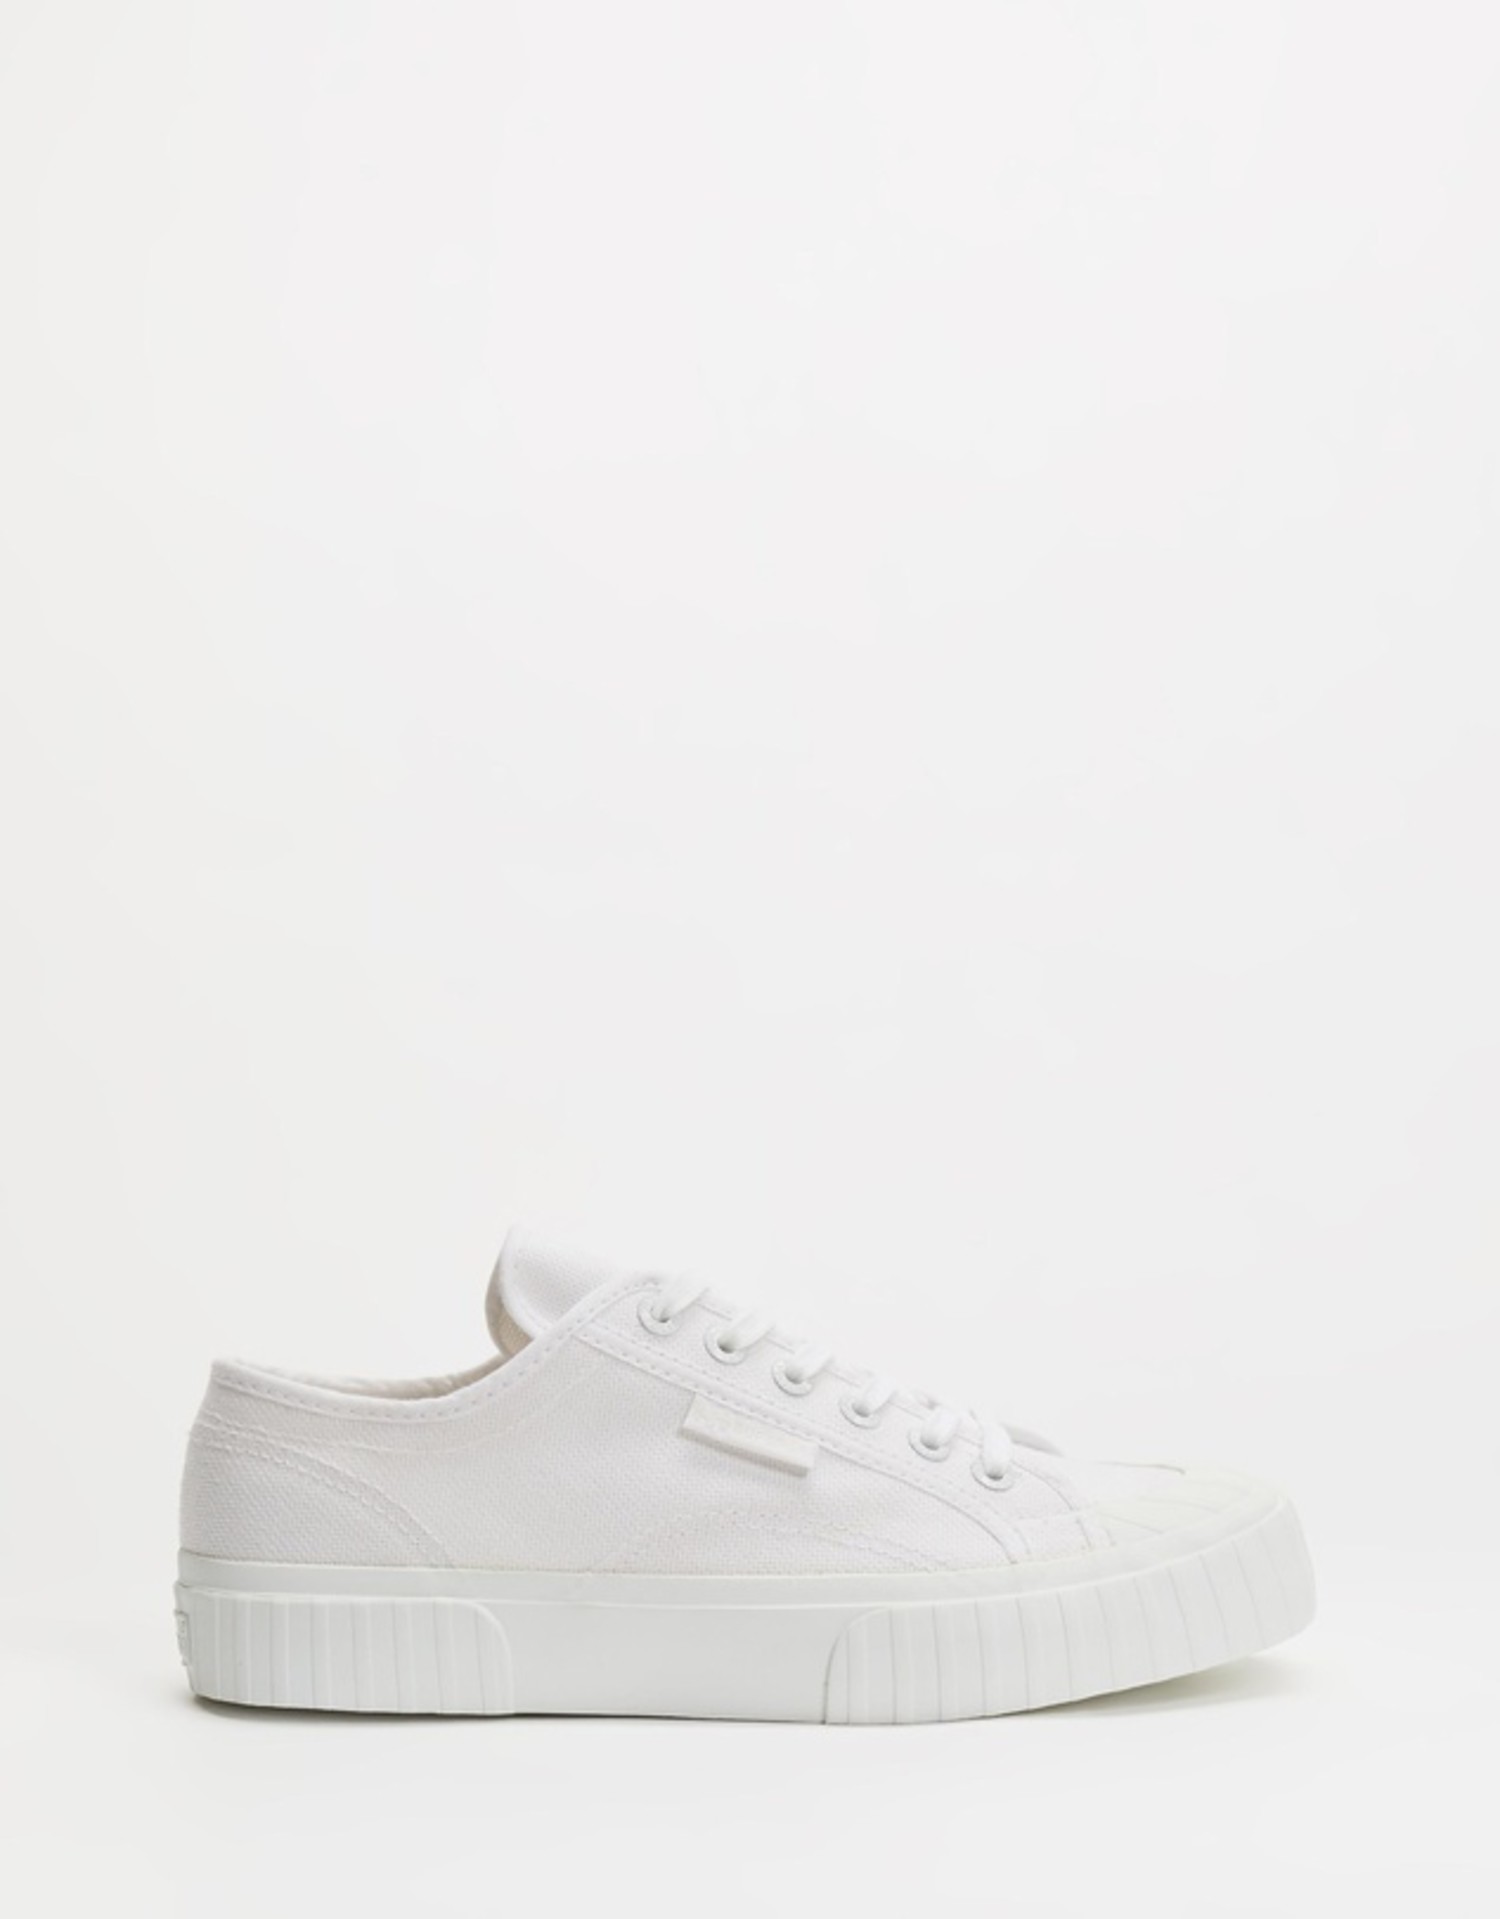 SUPERGA 2630 STRIPE C42 TOTALLY WHITE - Clever Ain't Wise